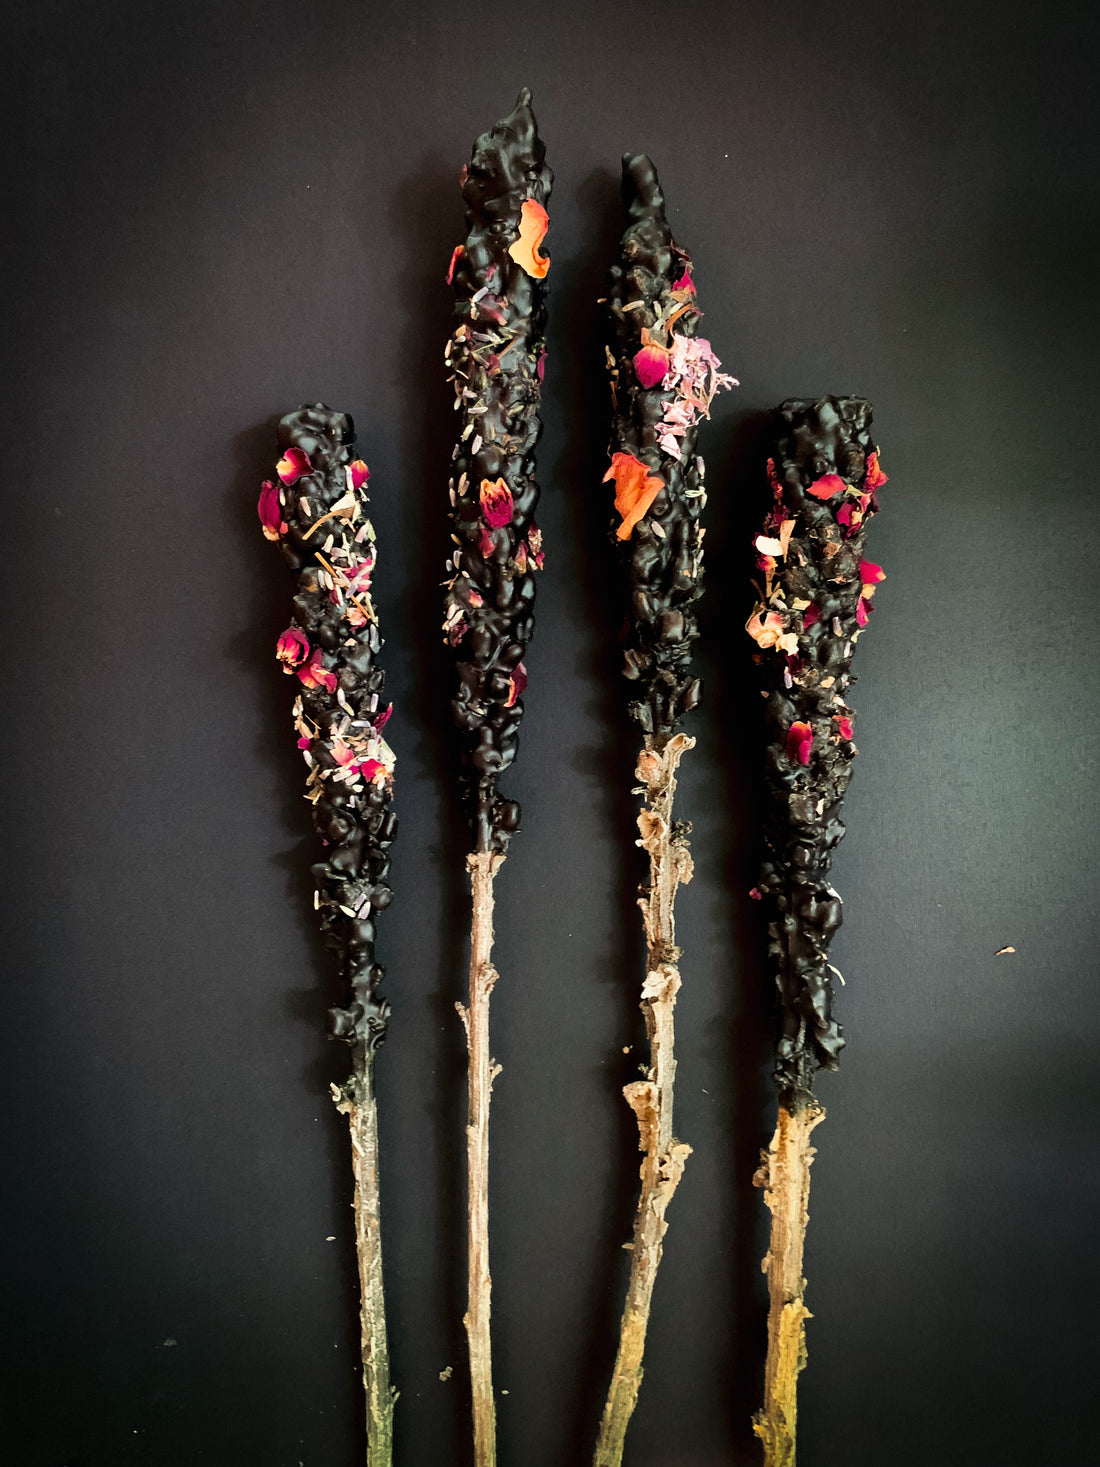 Hag Torches/Witch Candles